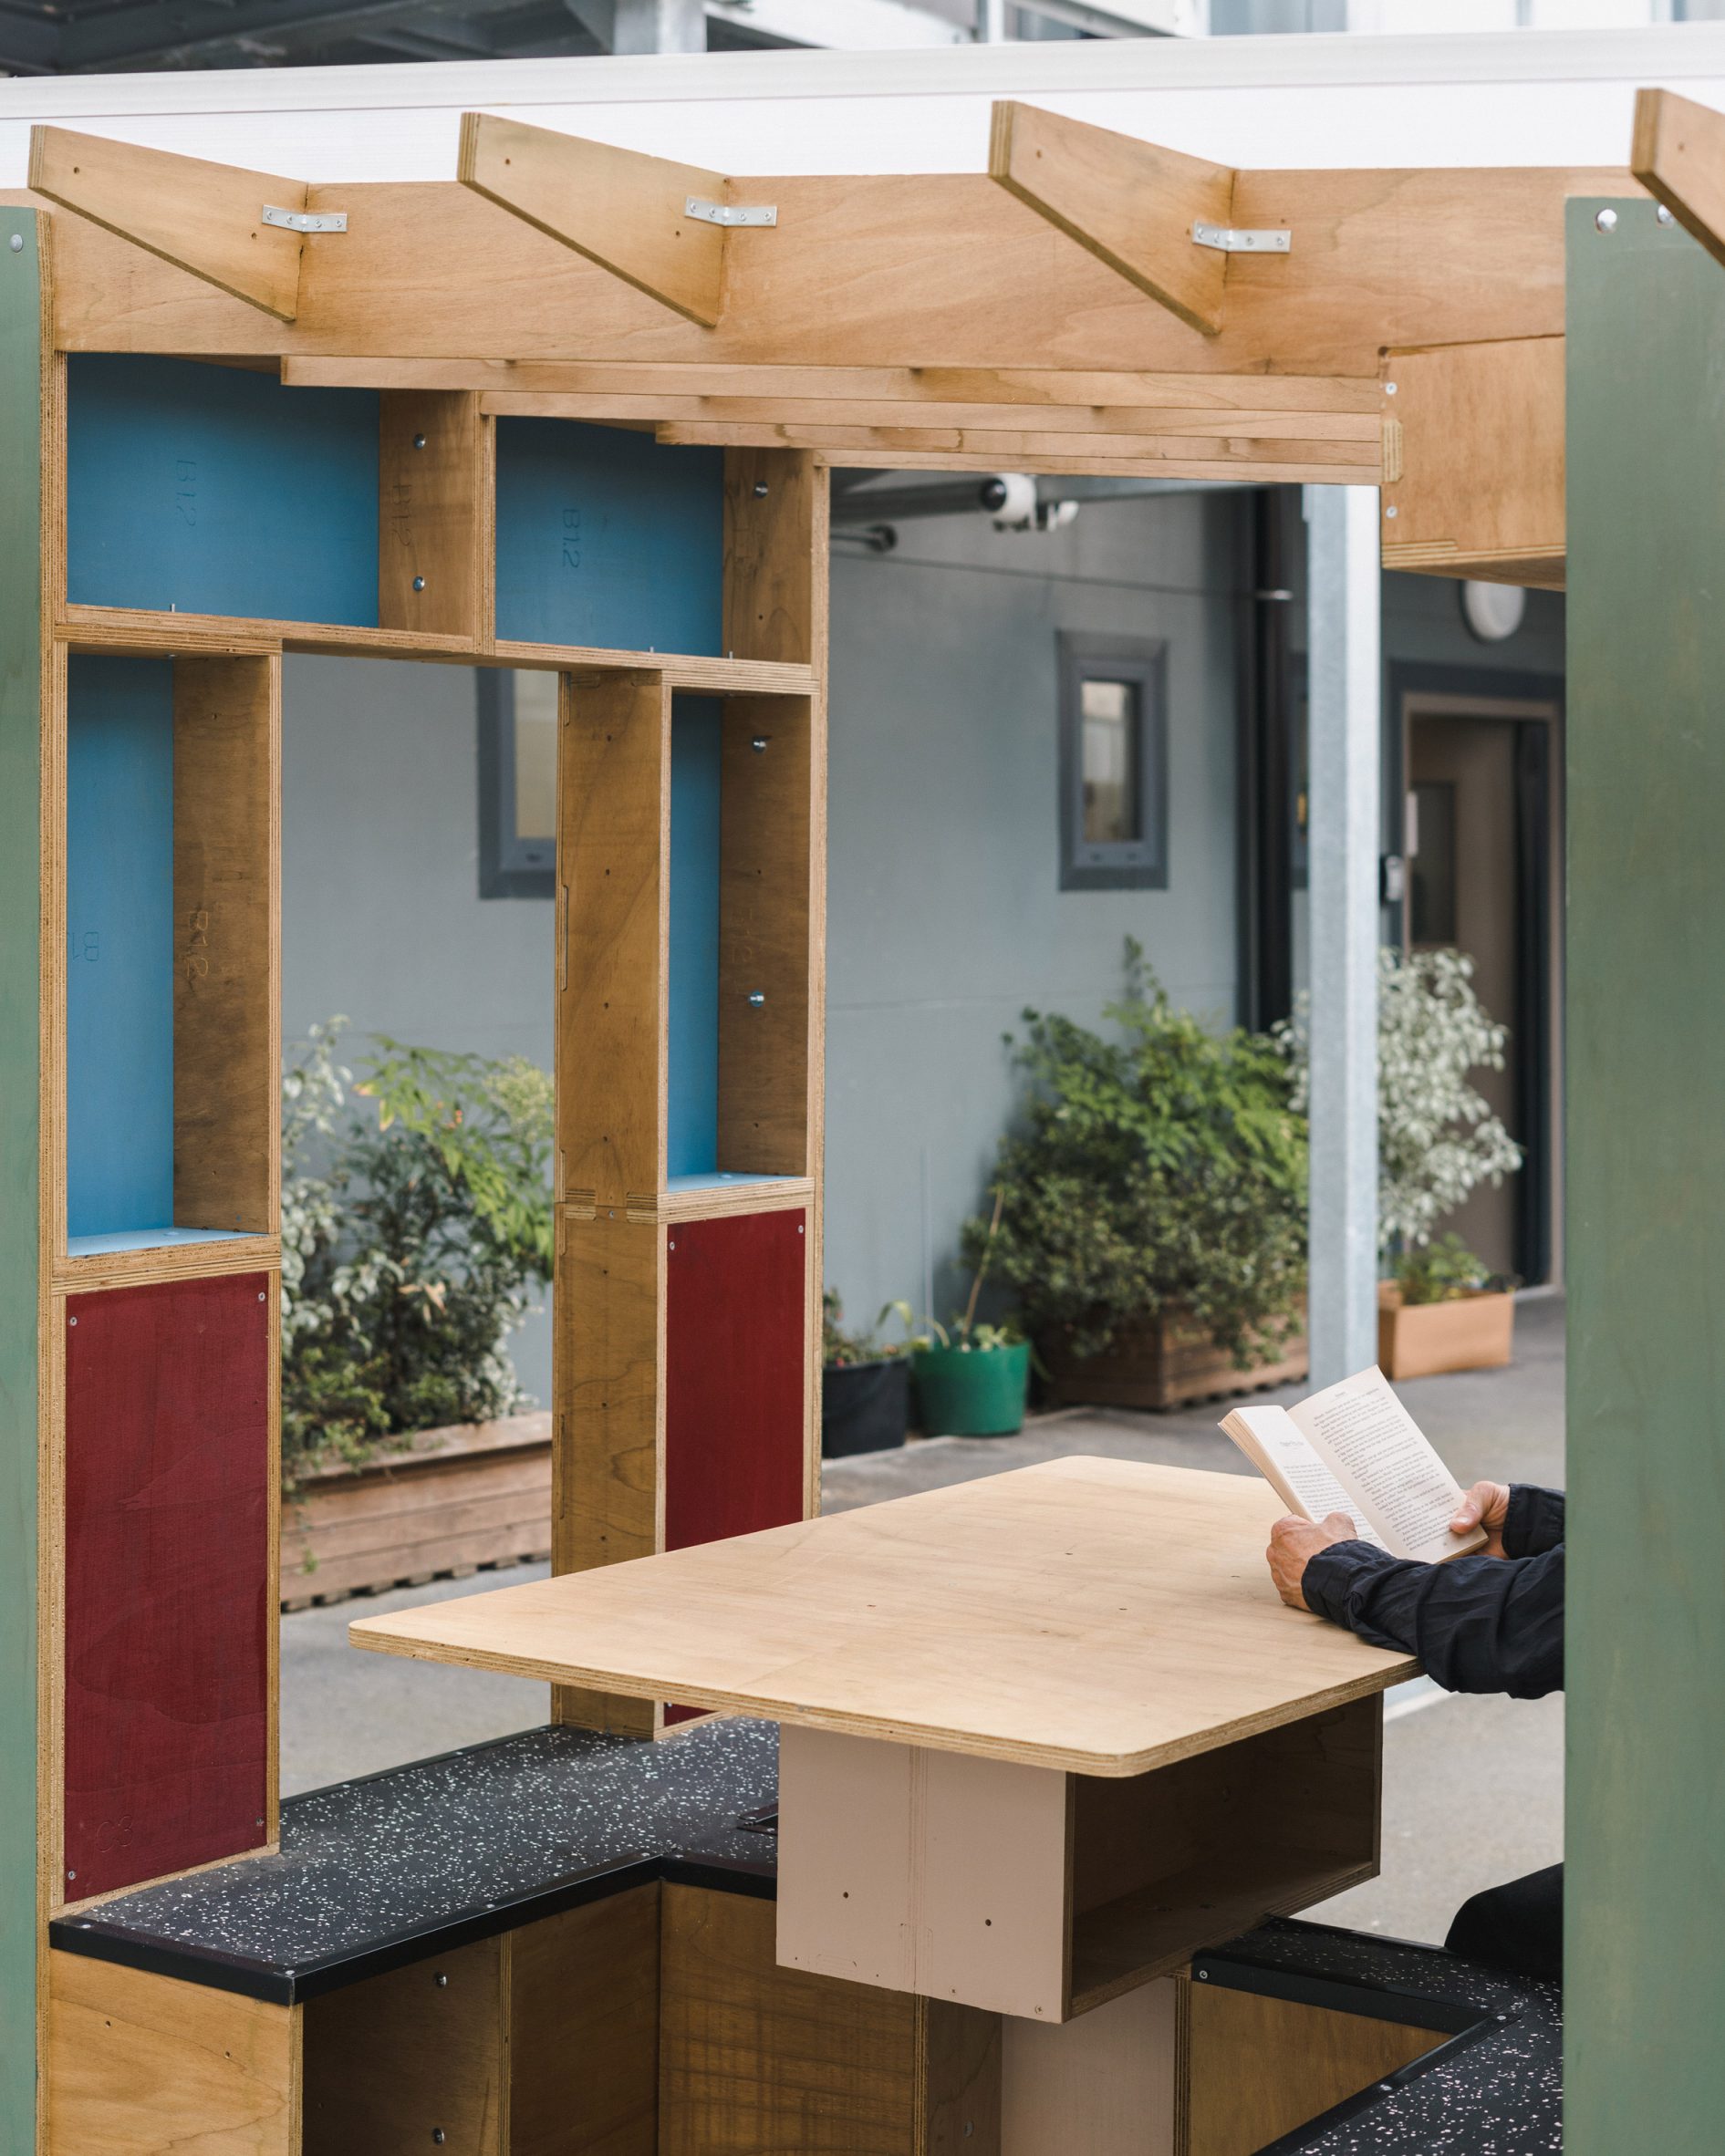 Modular plywood structure with table and seating